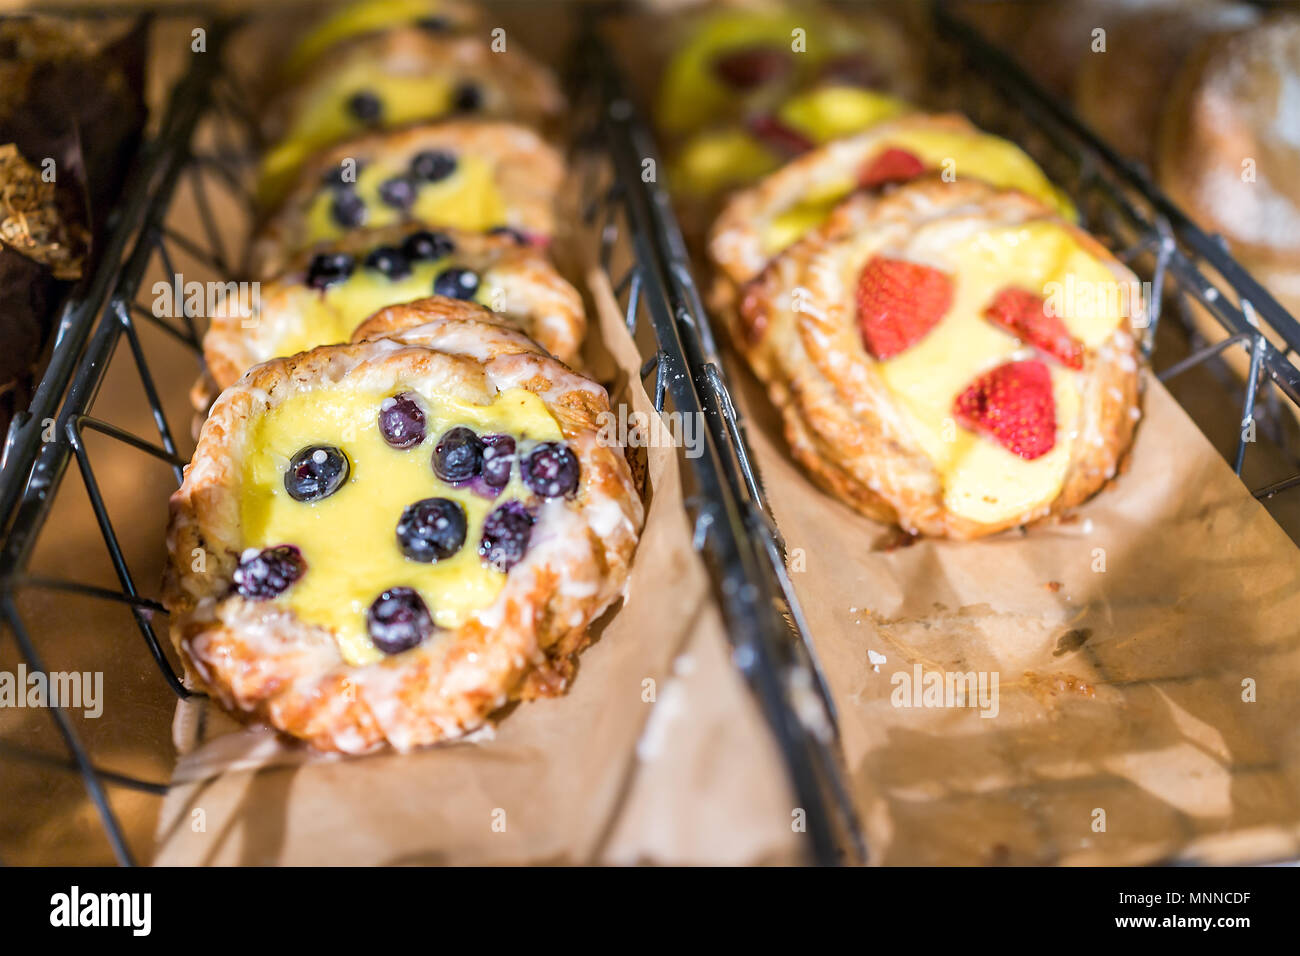 Closeup Of Many Yellow Cream Cheese Berry Fruit Blueberry And Strawberry Baked Danish Pastries On Shelf Tray Display Desserts In Bakery Shop Cafe Stor Stock Photo Alamy